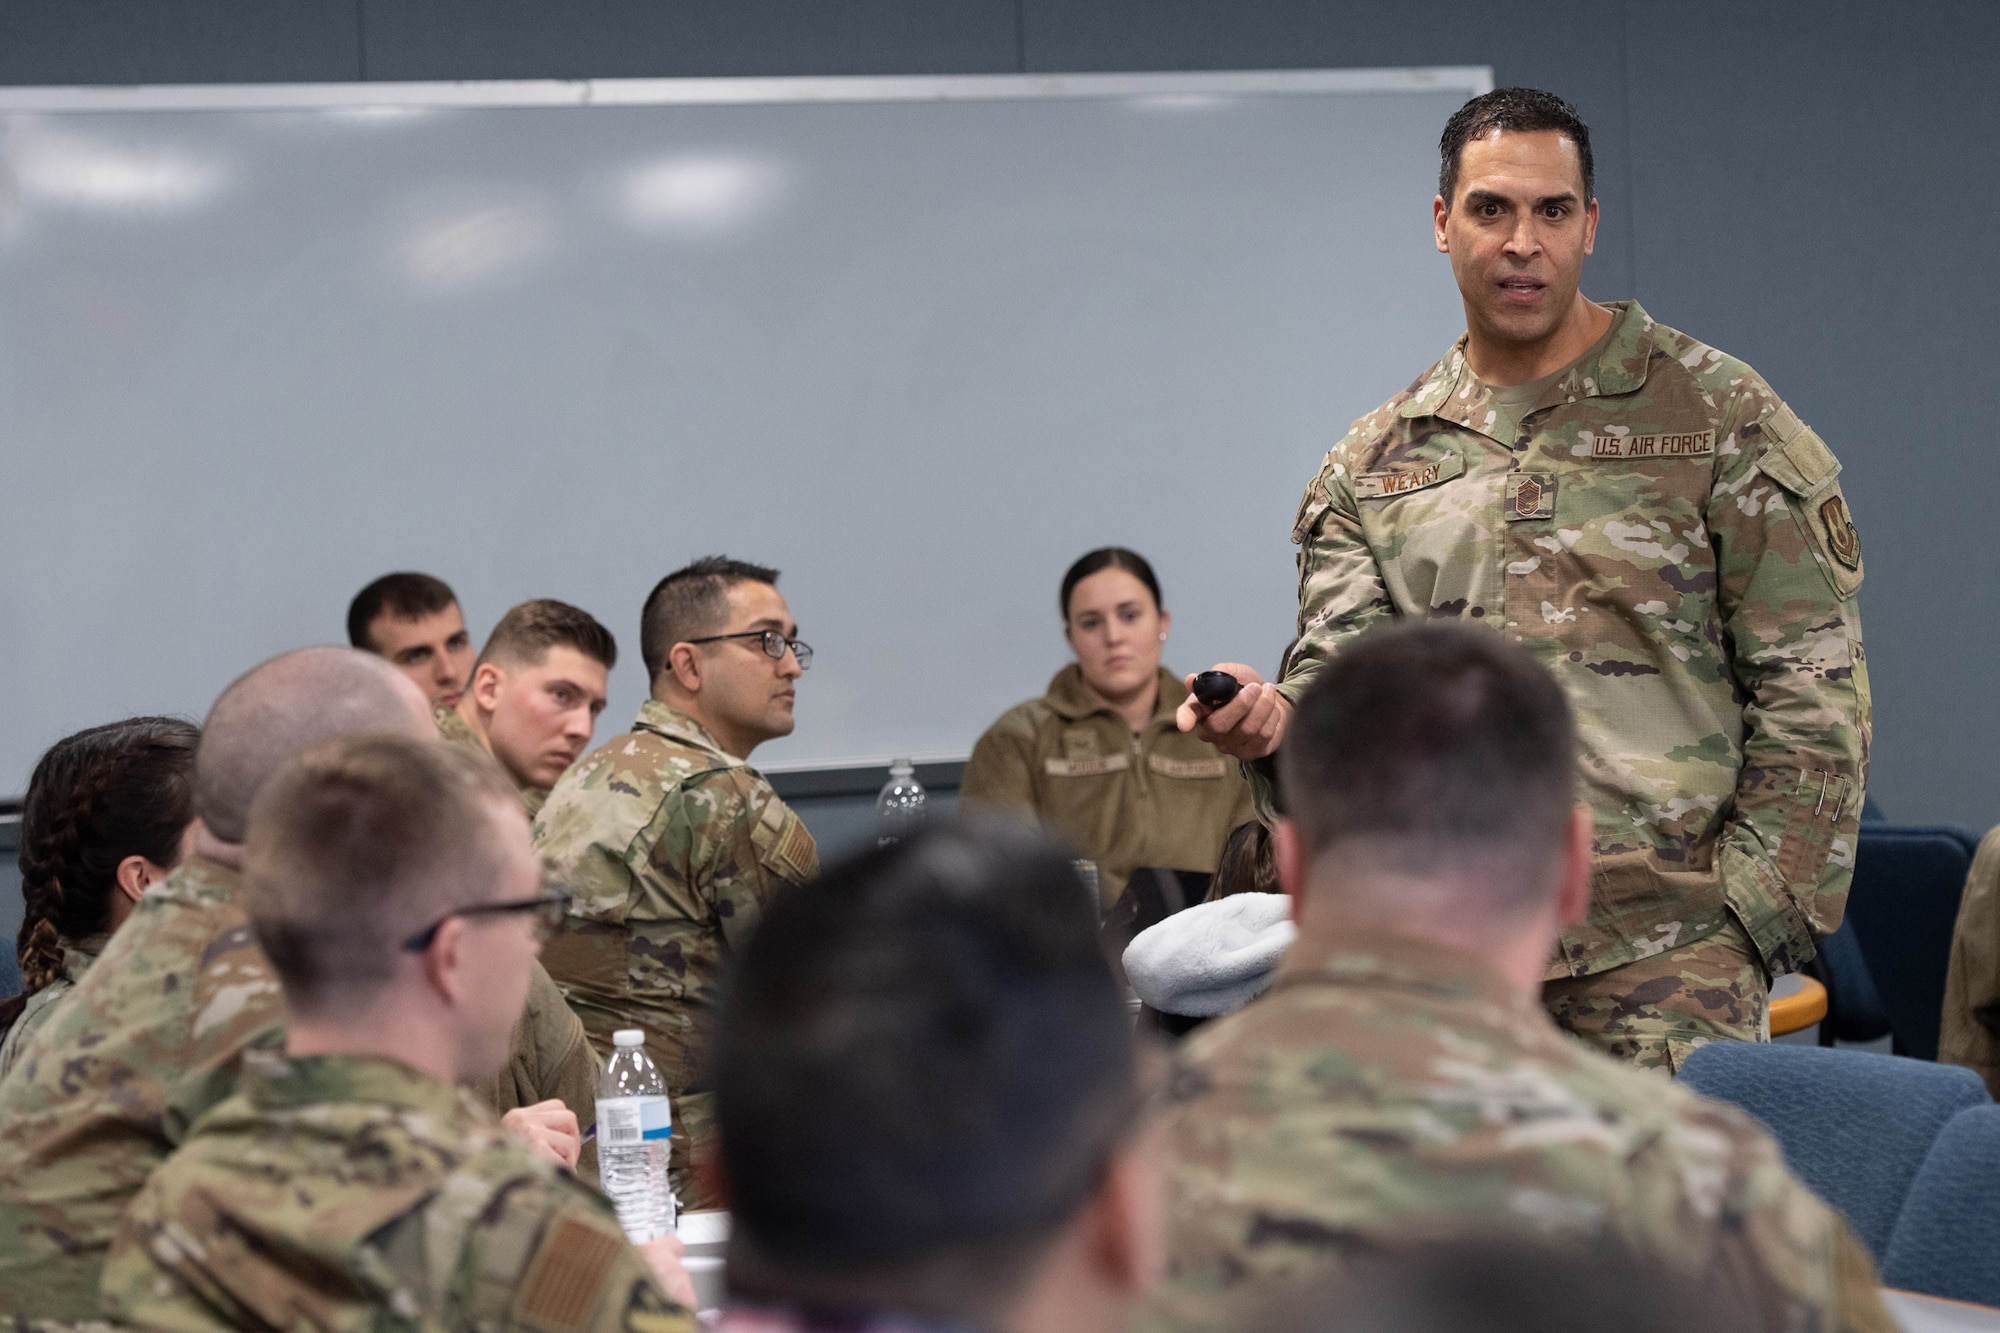 Image of Airman speaking during course